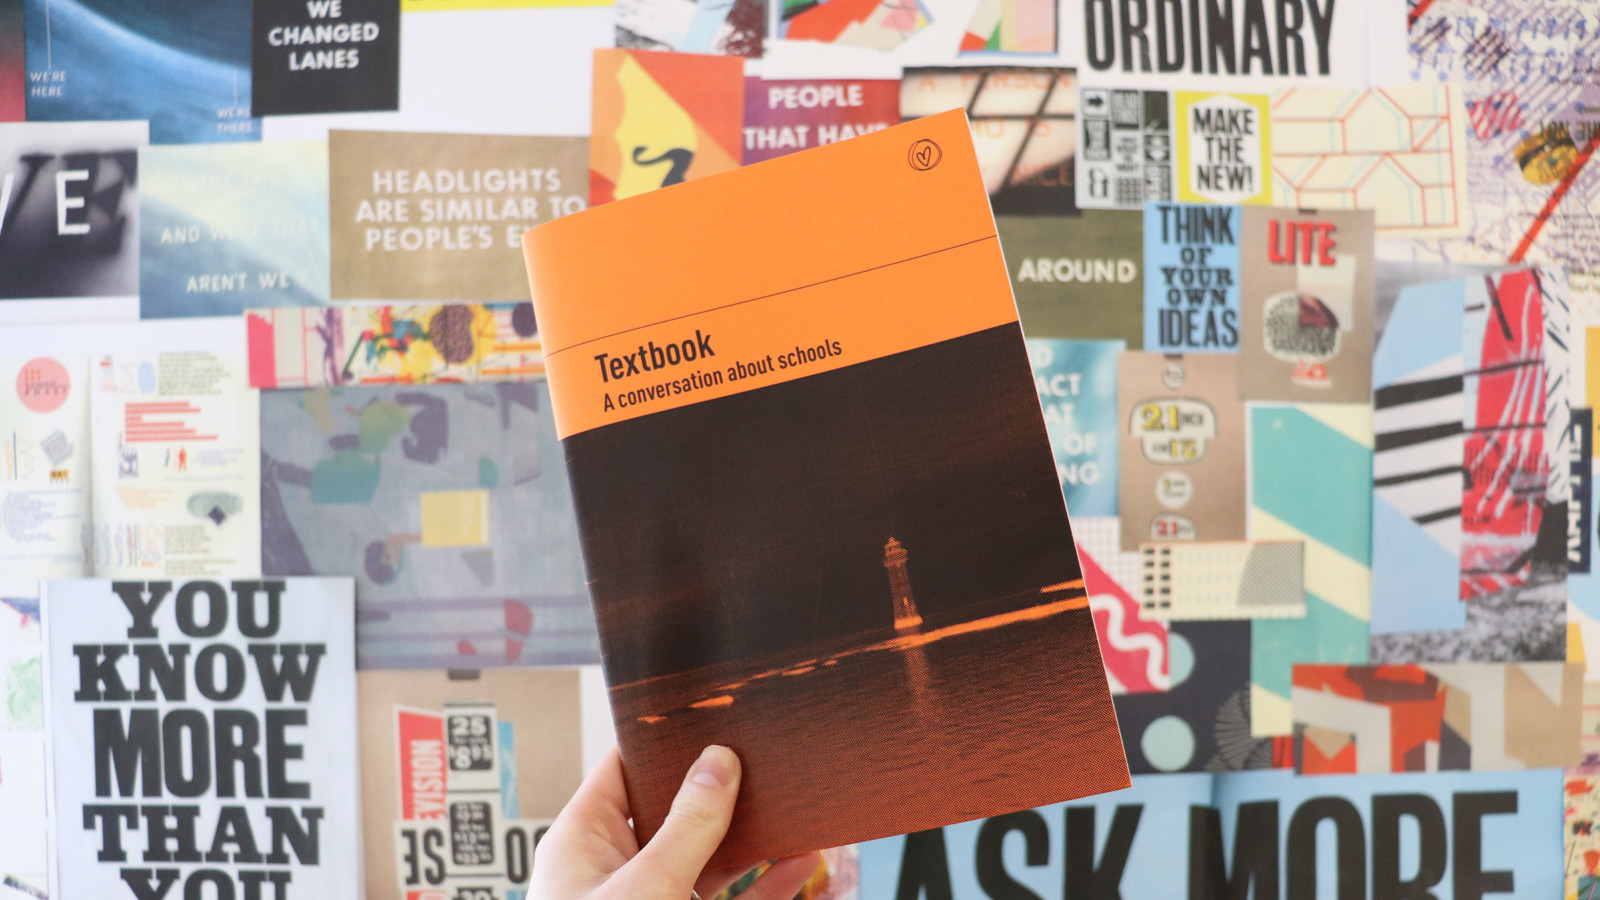 A hand holds a black and orange booklet up in front of a wall full of posters. On the front of the book is an image of a lighthouse and the title 'Textbook'.